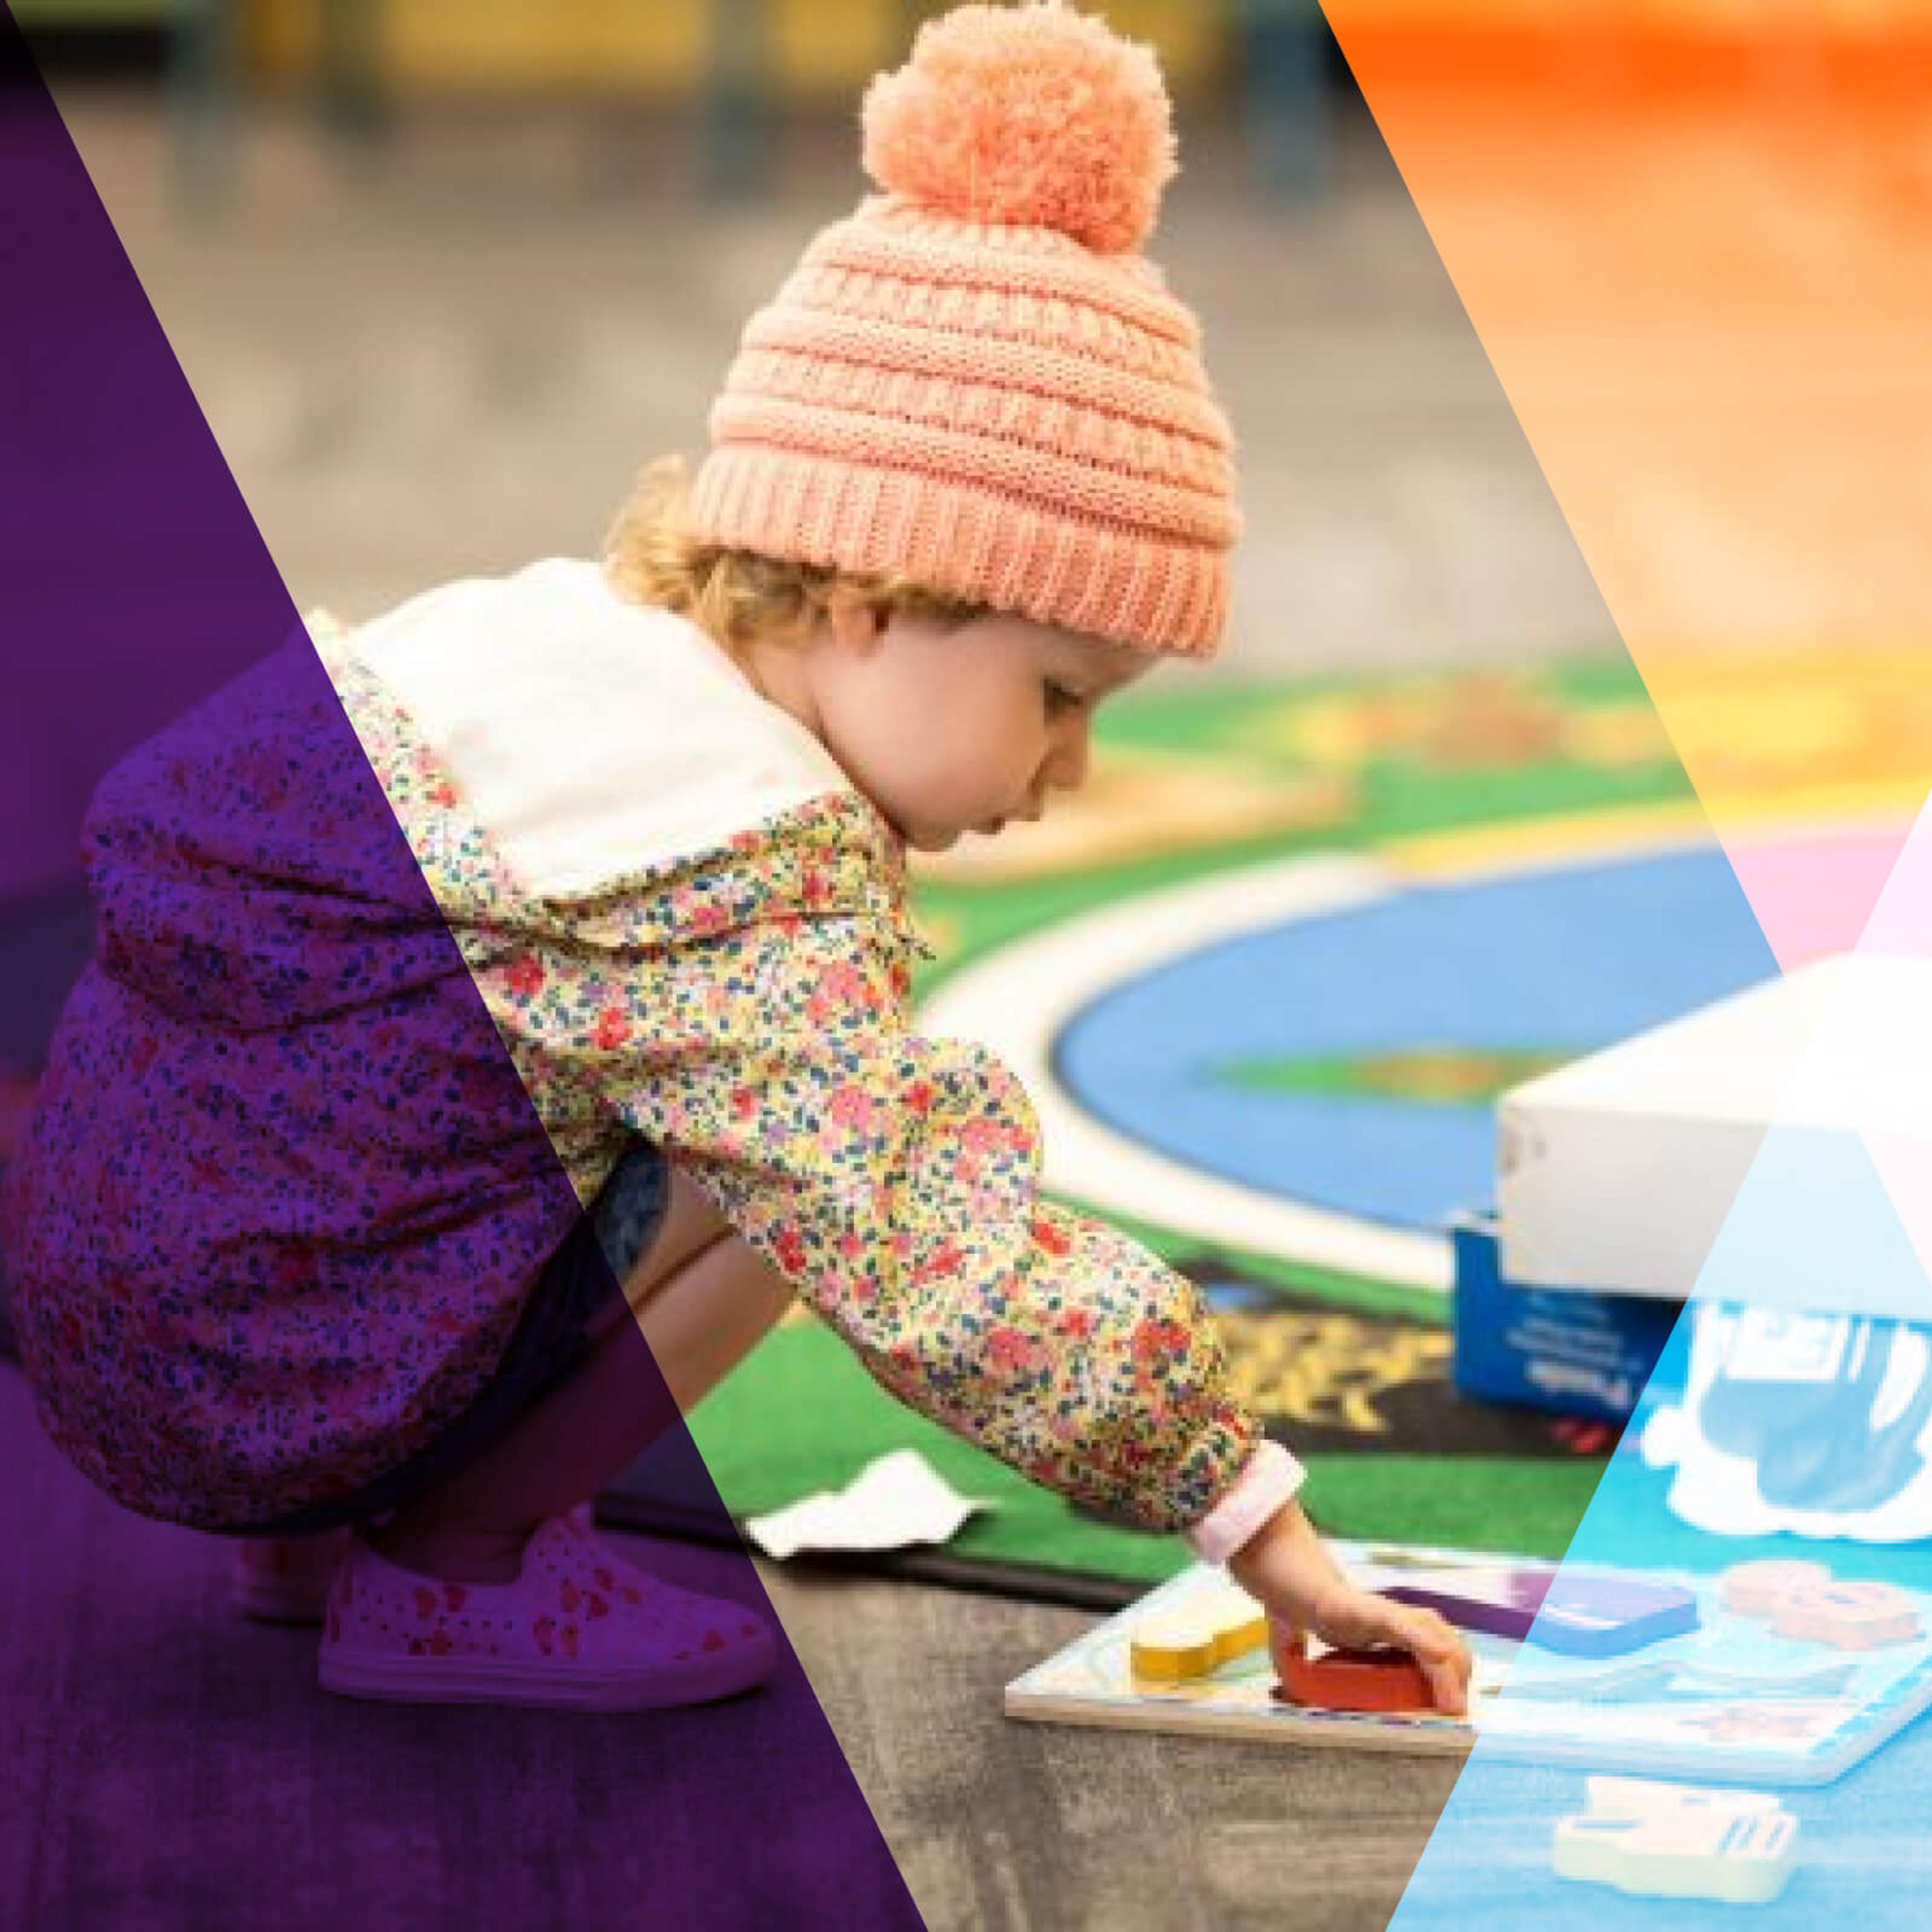 A child wearing a toque and winter jacket, playing with blocks with a colorful overlay.